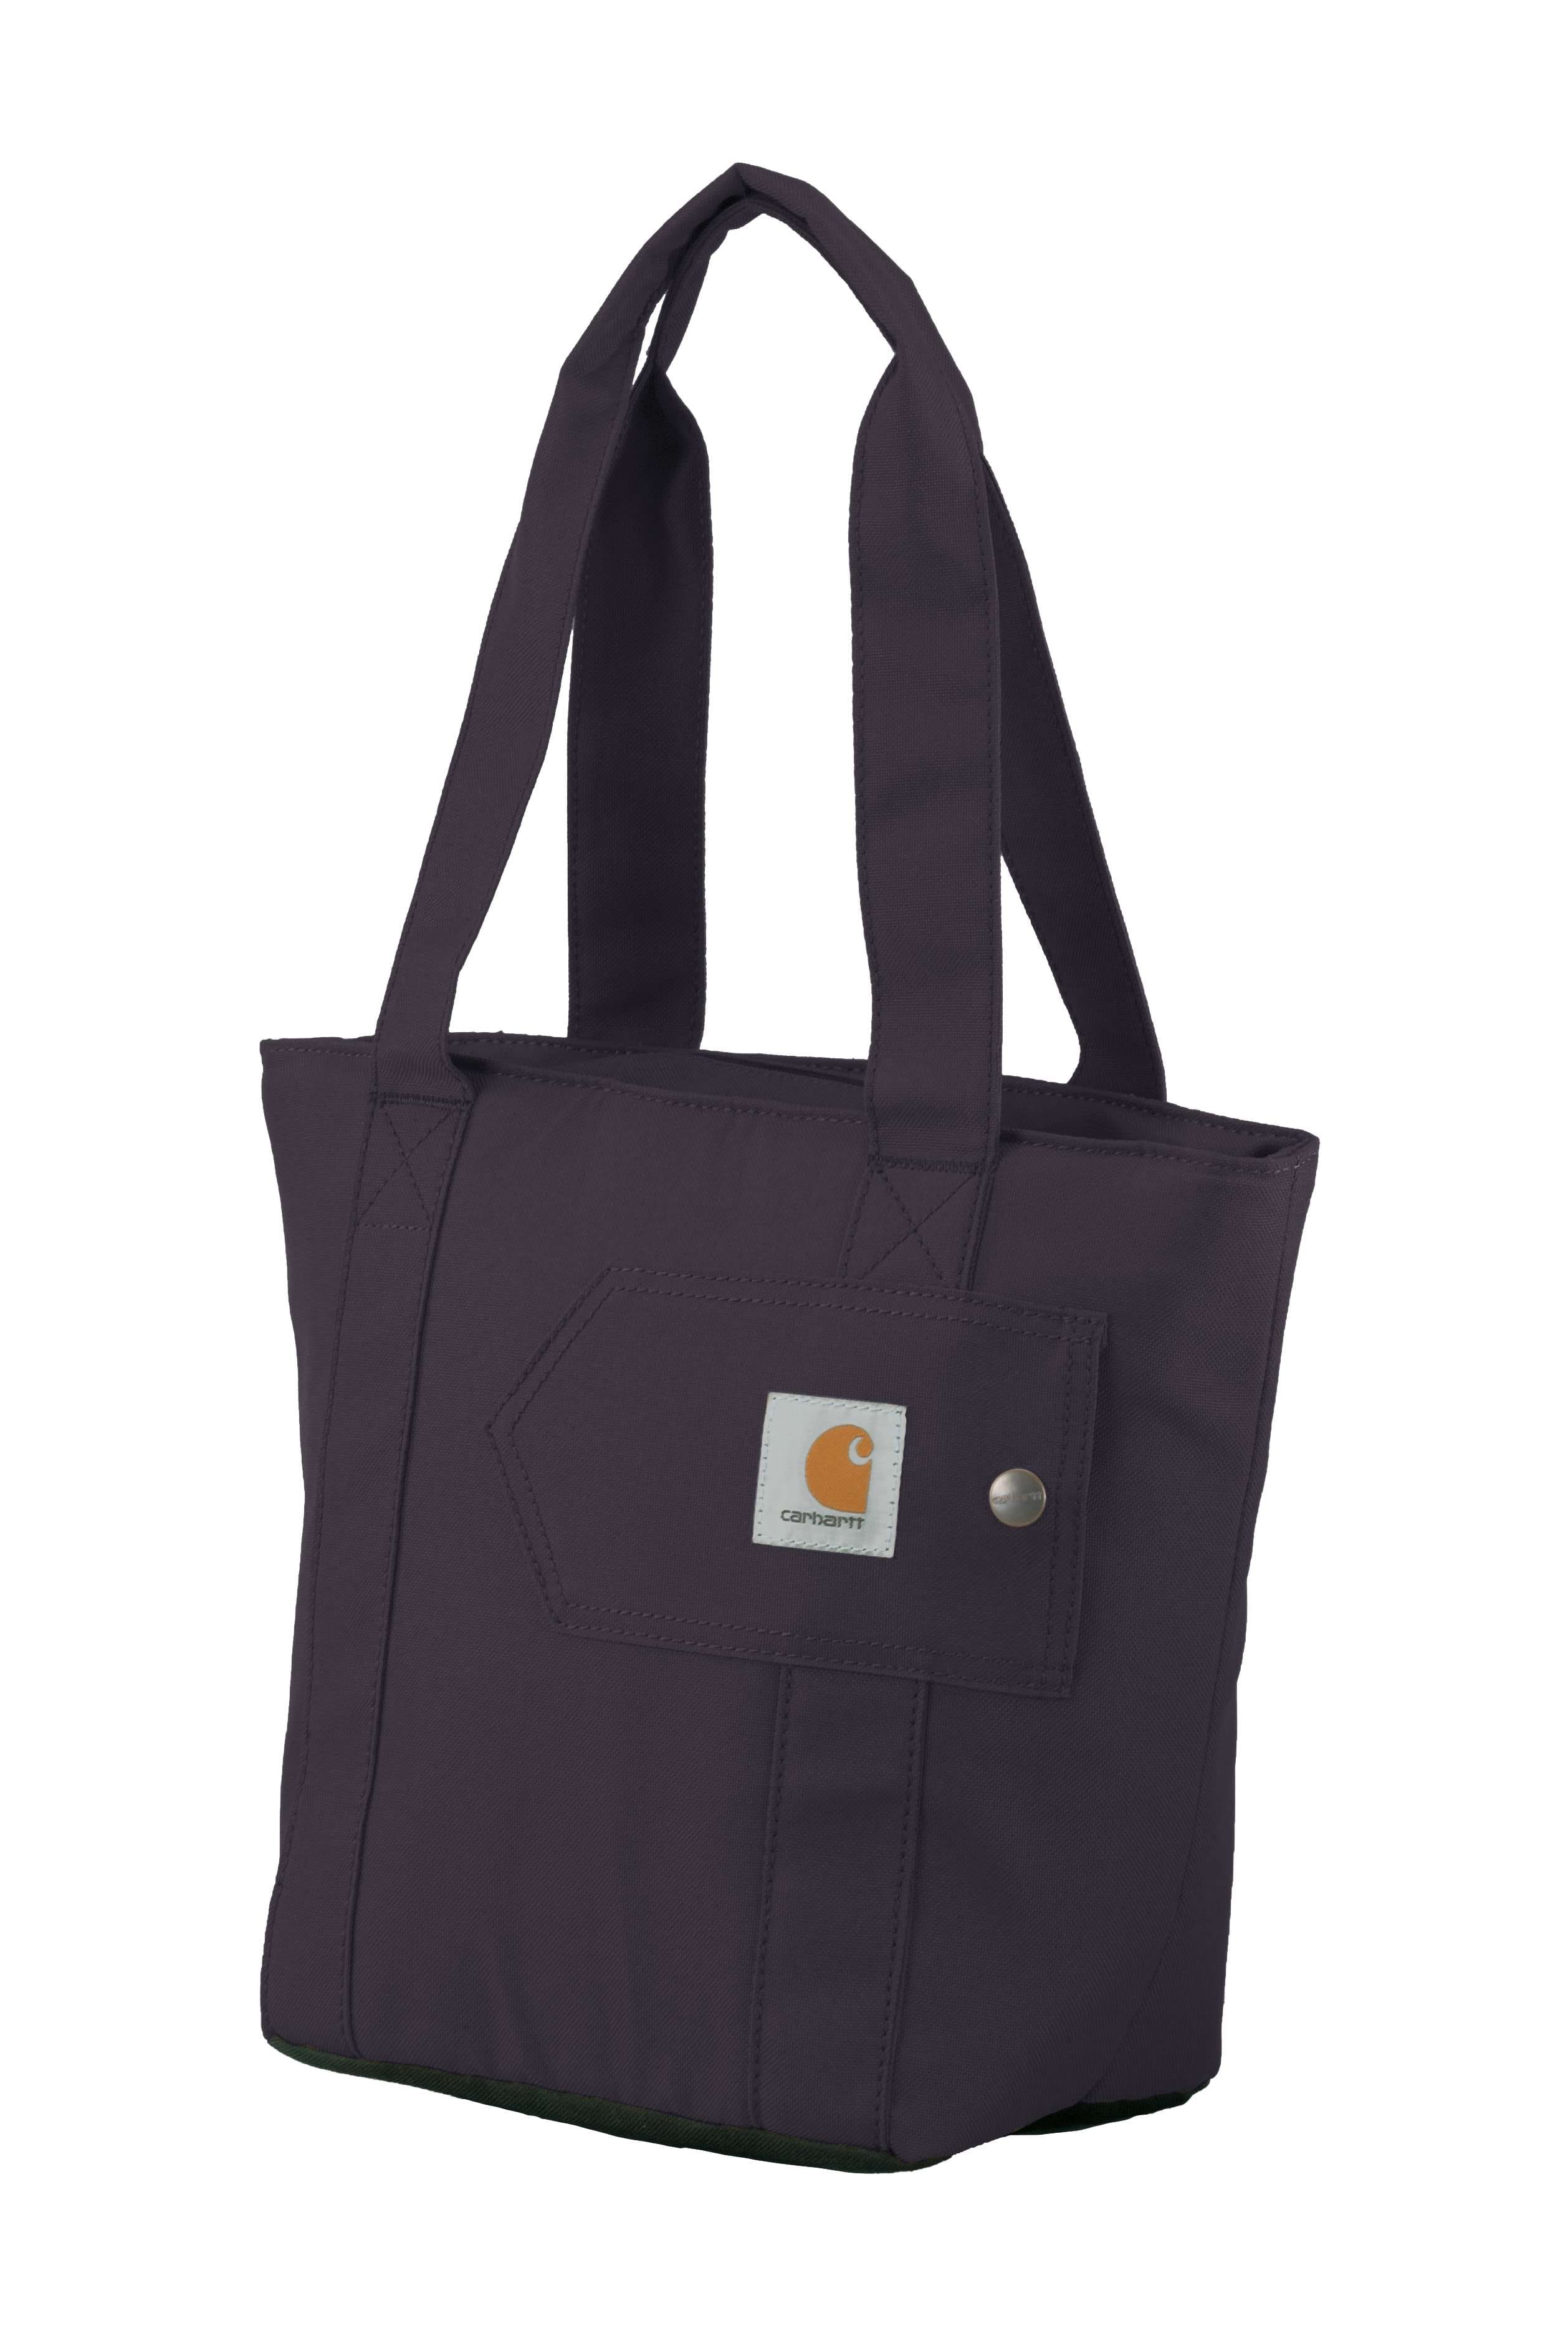 lunch bags and totes